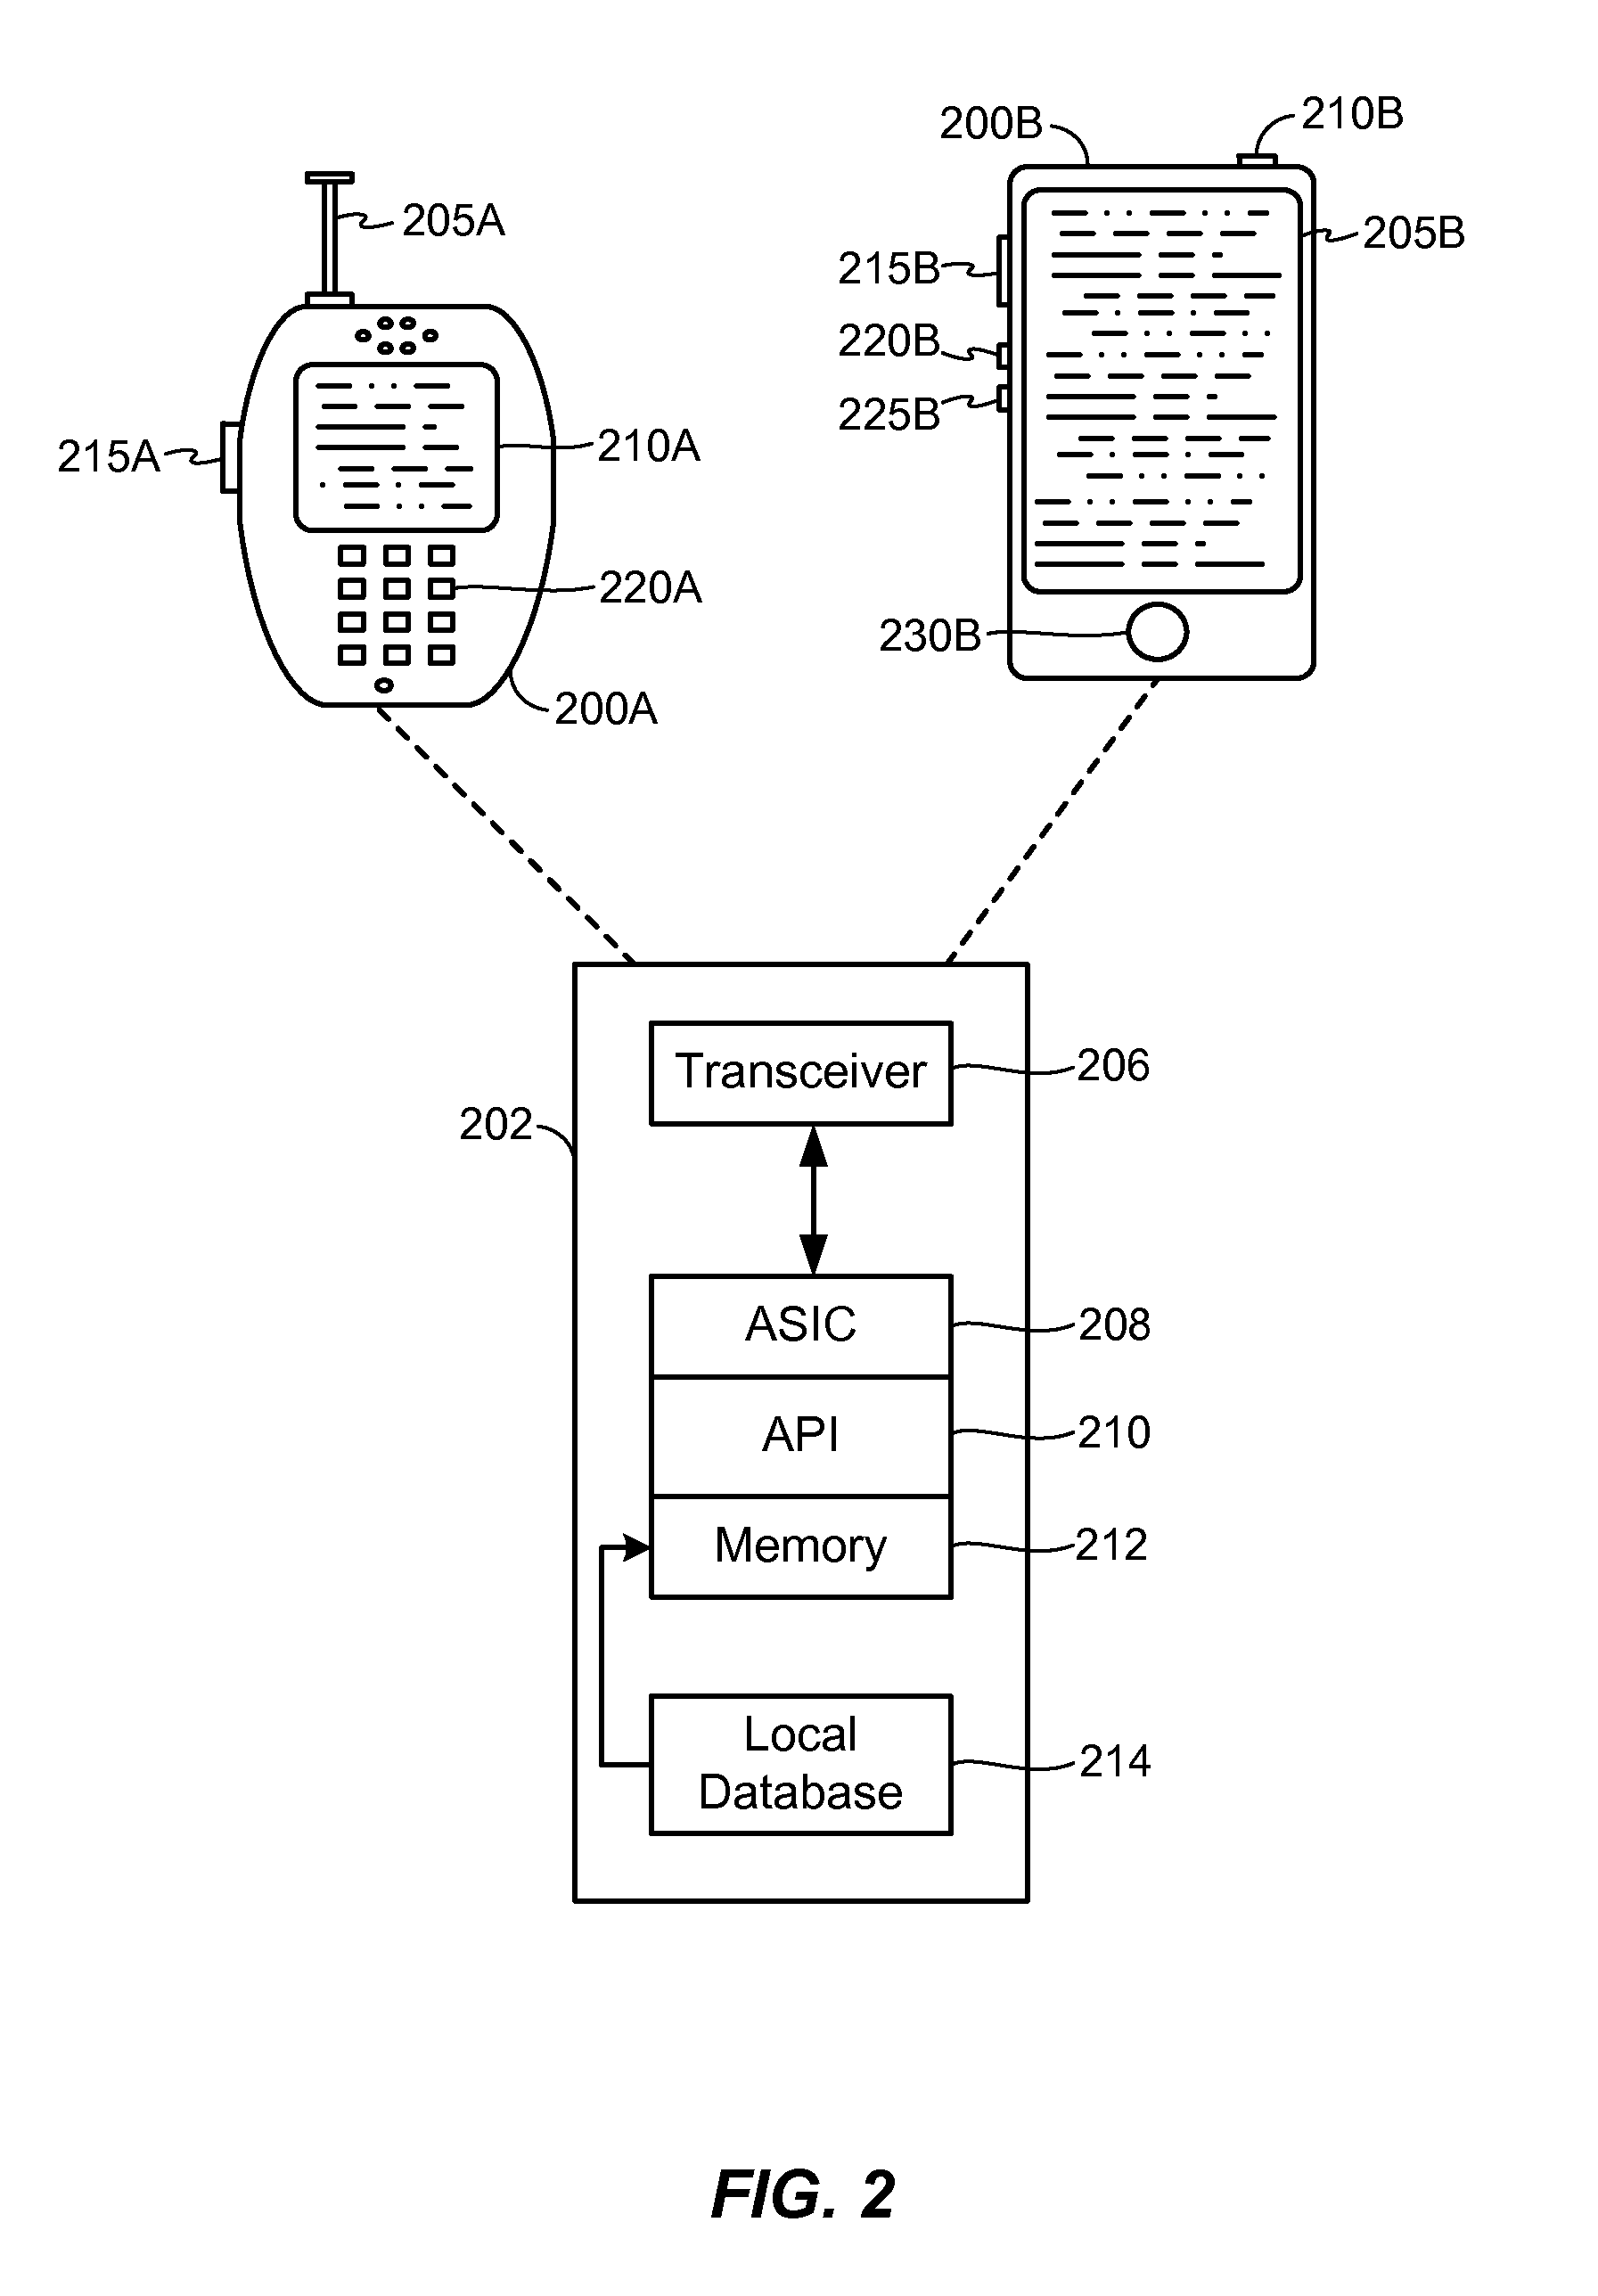 Configuring audio for a coordinated display session between a plurality of proximate client devices